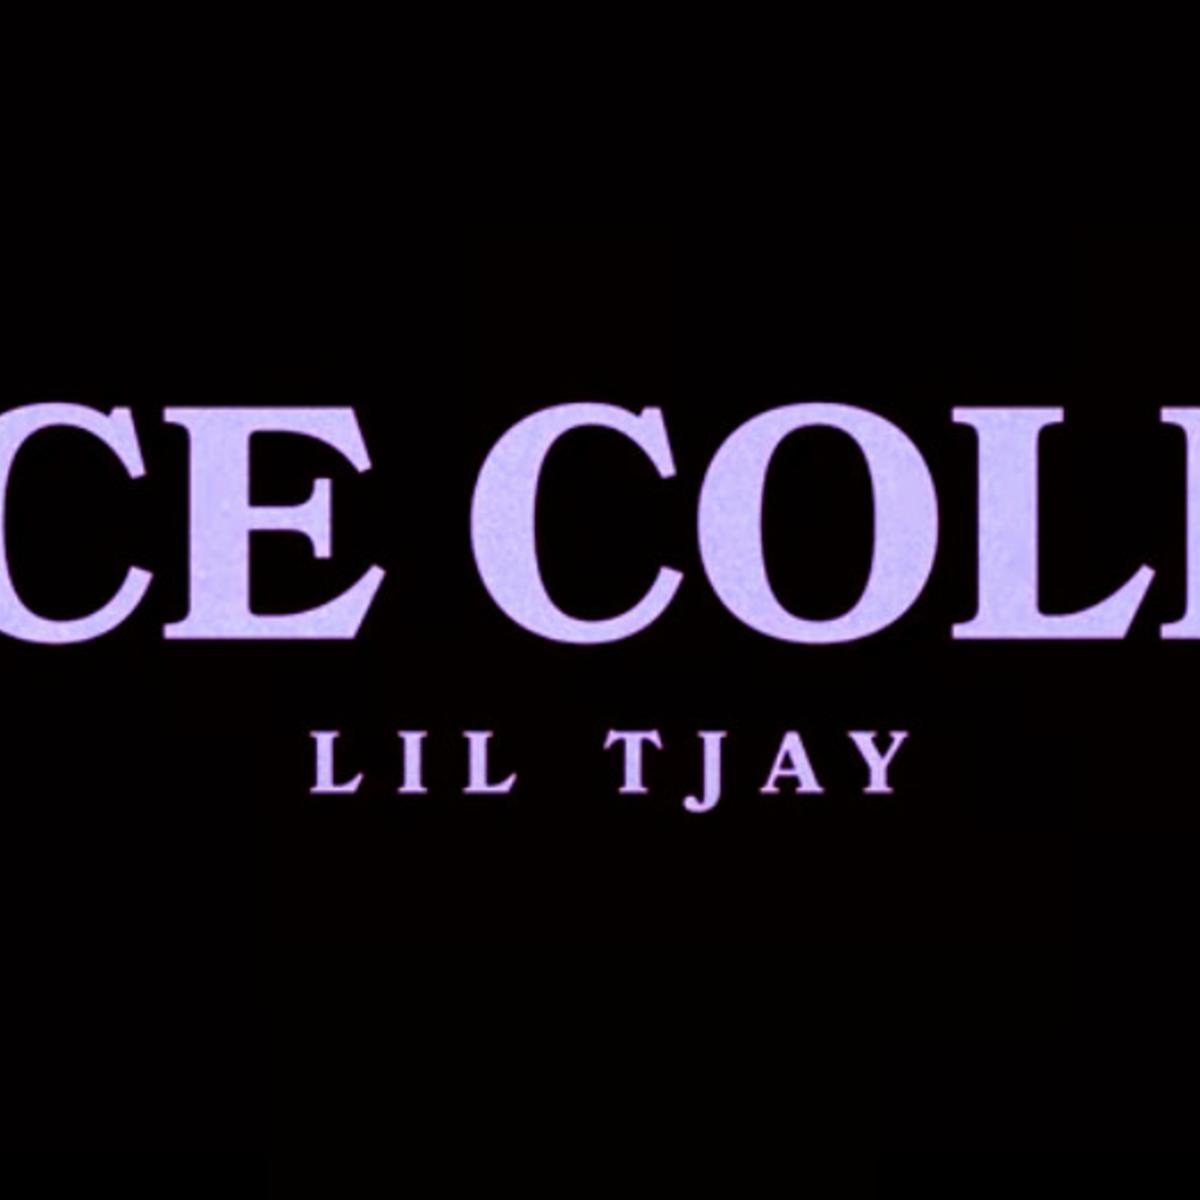 Lil Tjay Drops “Ice Cold” On His 19th Birthday